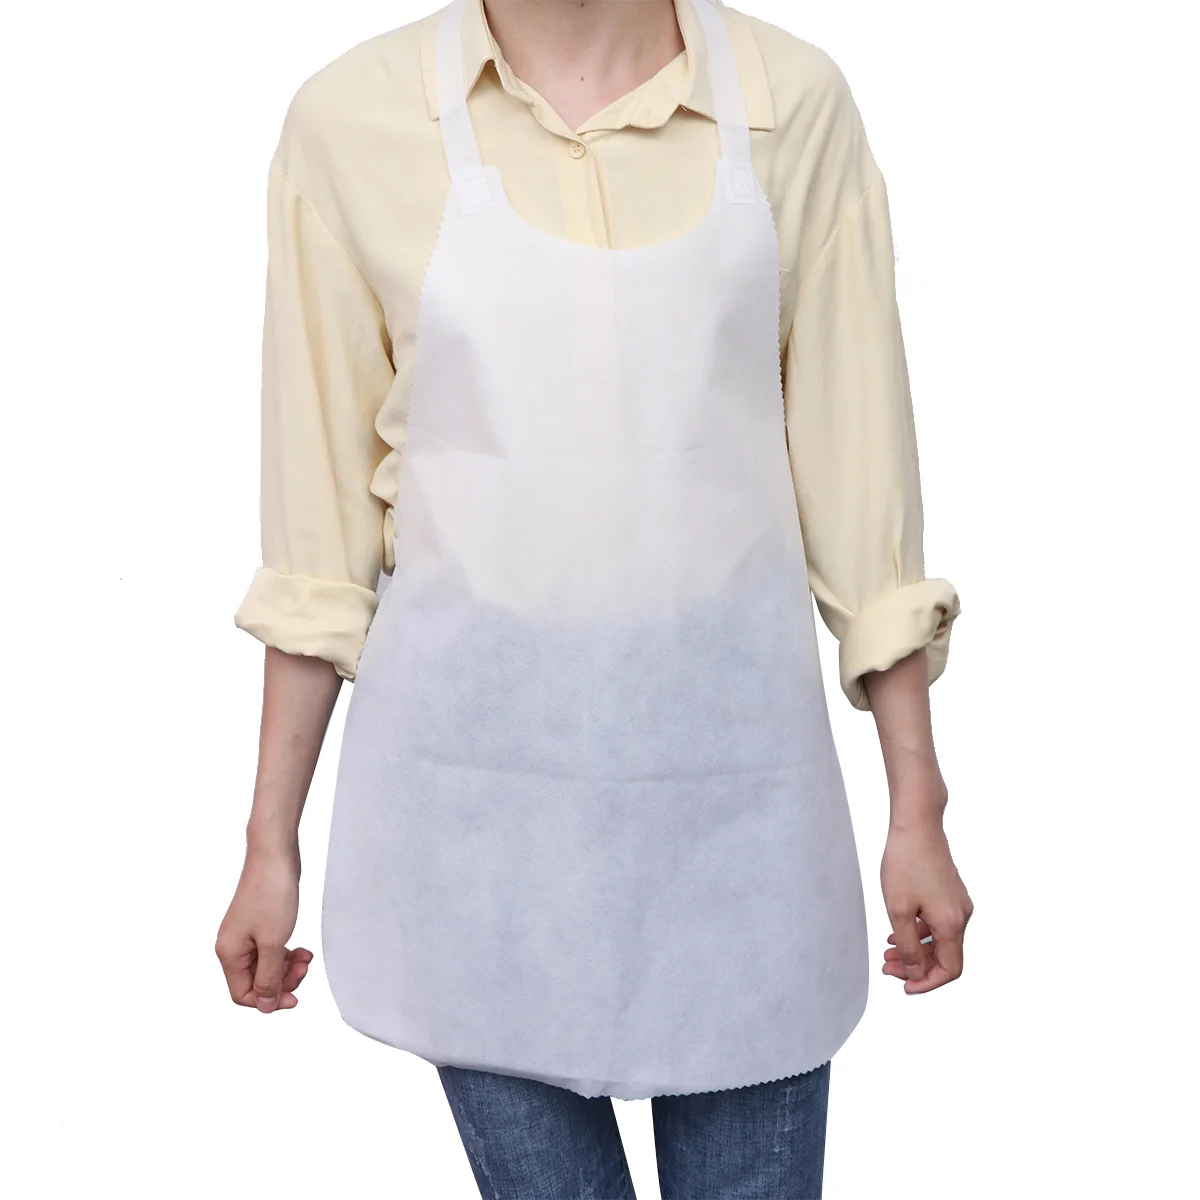 

10pcs Cooking Aprons Cooking Pinafore Aprons Chef Aprons for Men Non Woven Aprons Bib Apron with Pockets